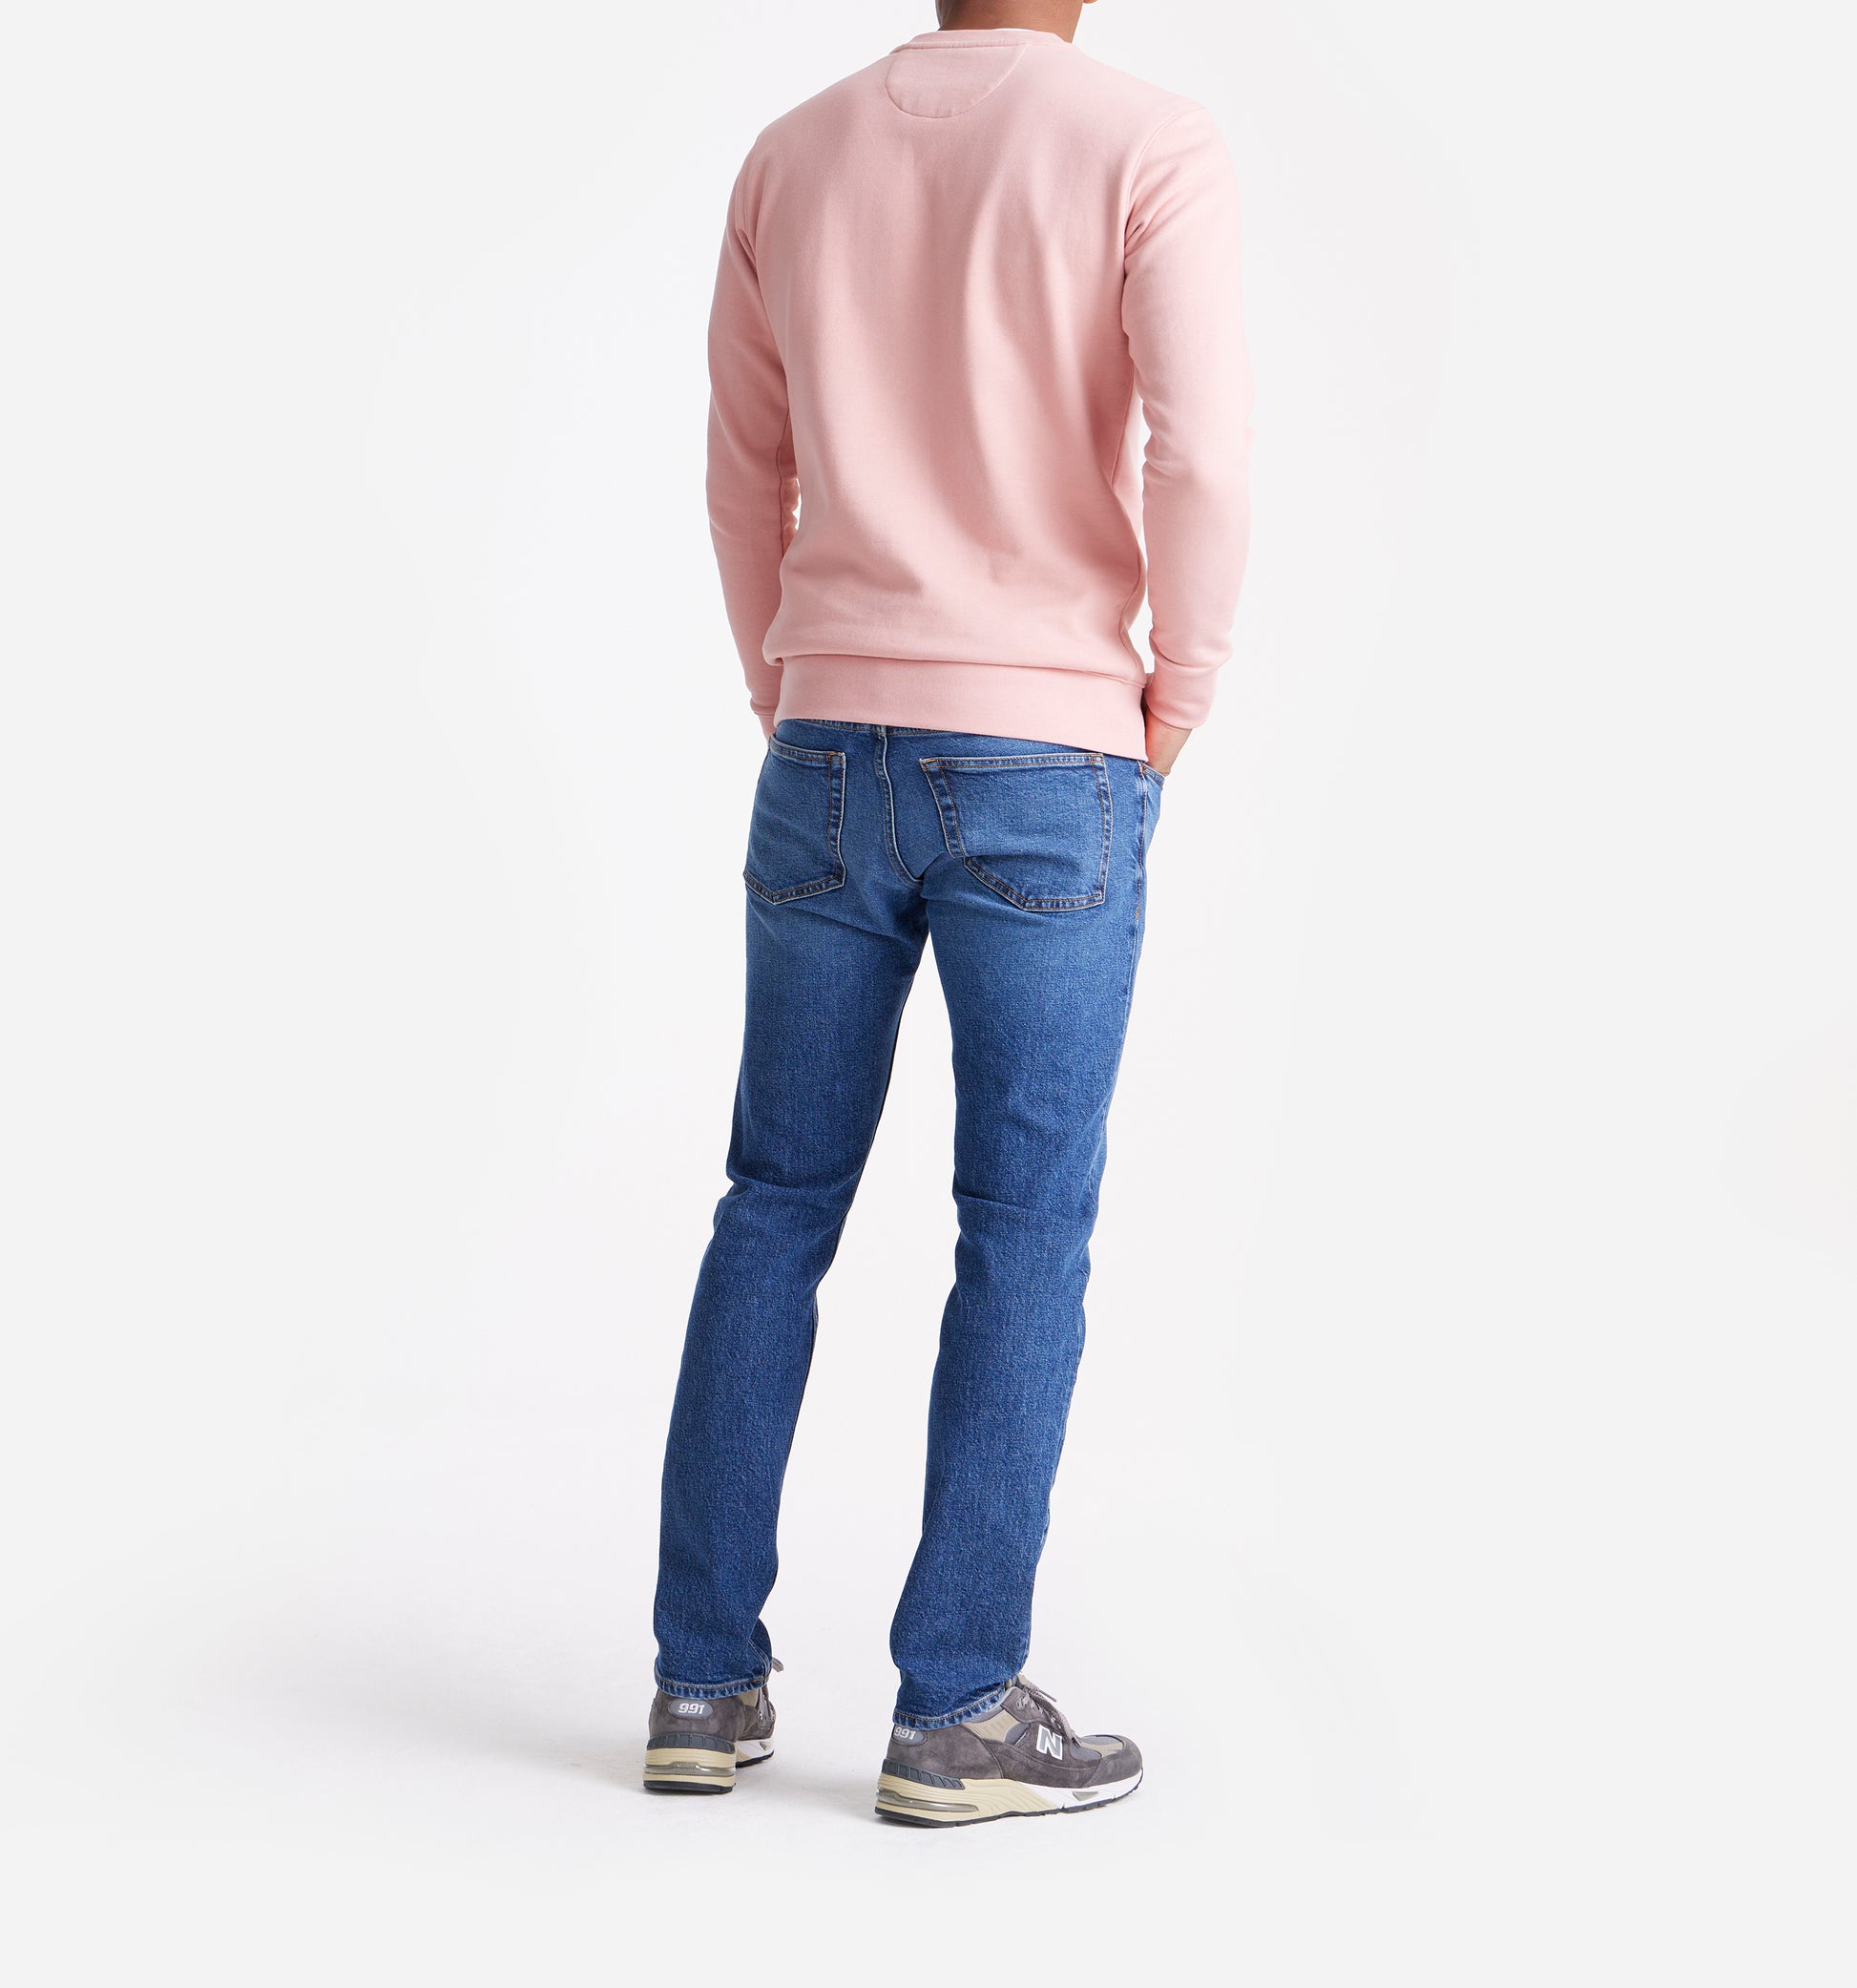 The George - French Terry Cotton Sweatshirt  In Dark Pink From King Essentials